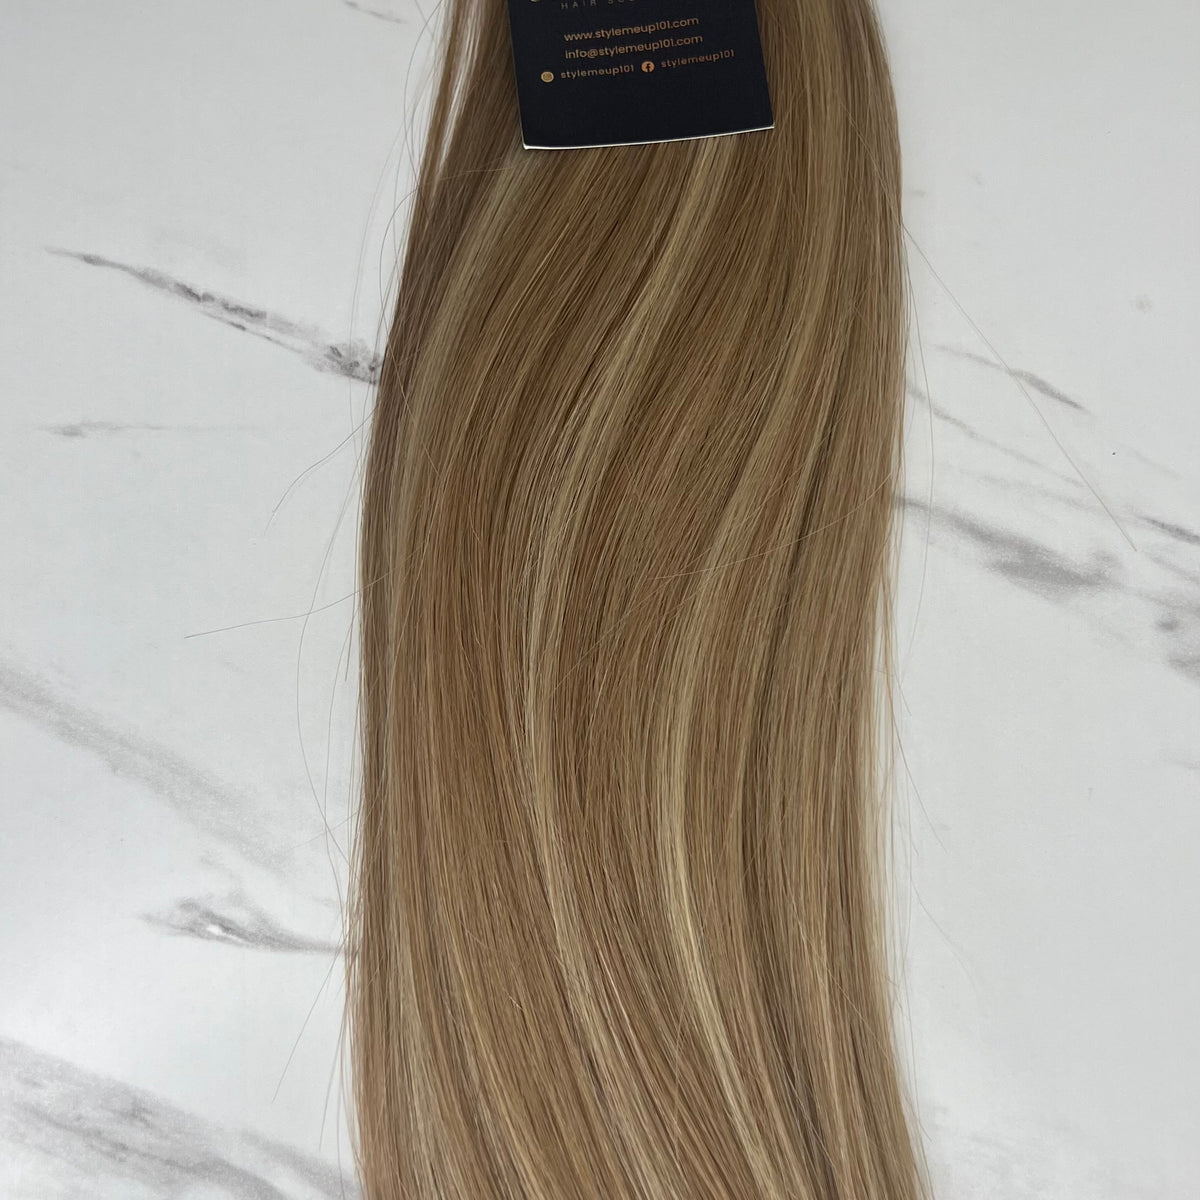 #18/22 Highlighted Genius Wefts